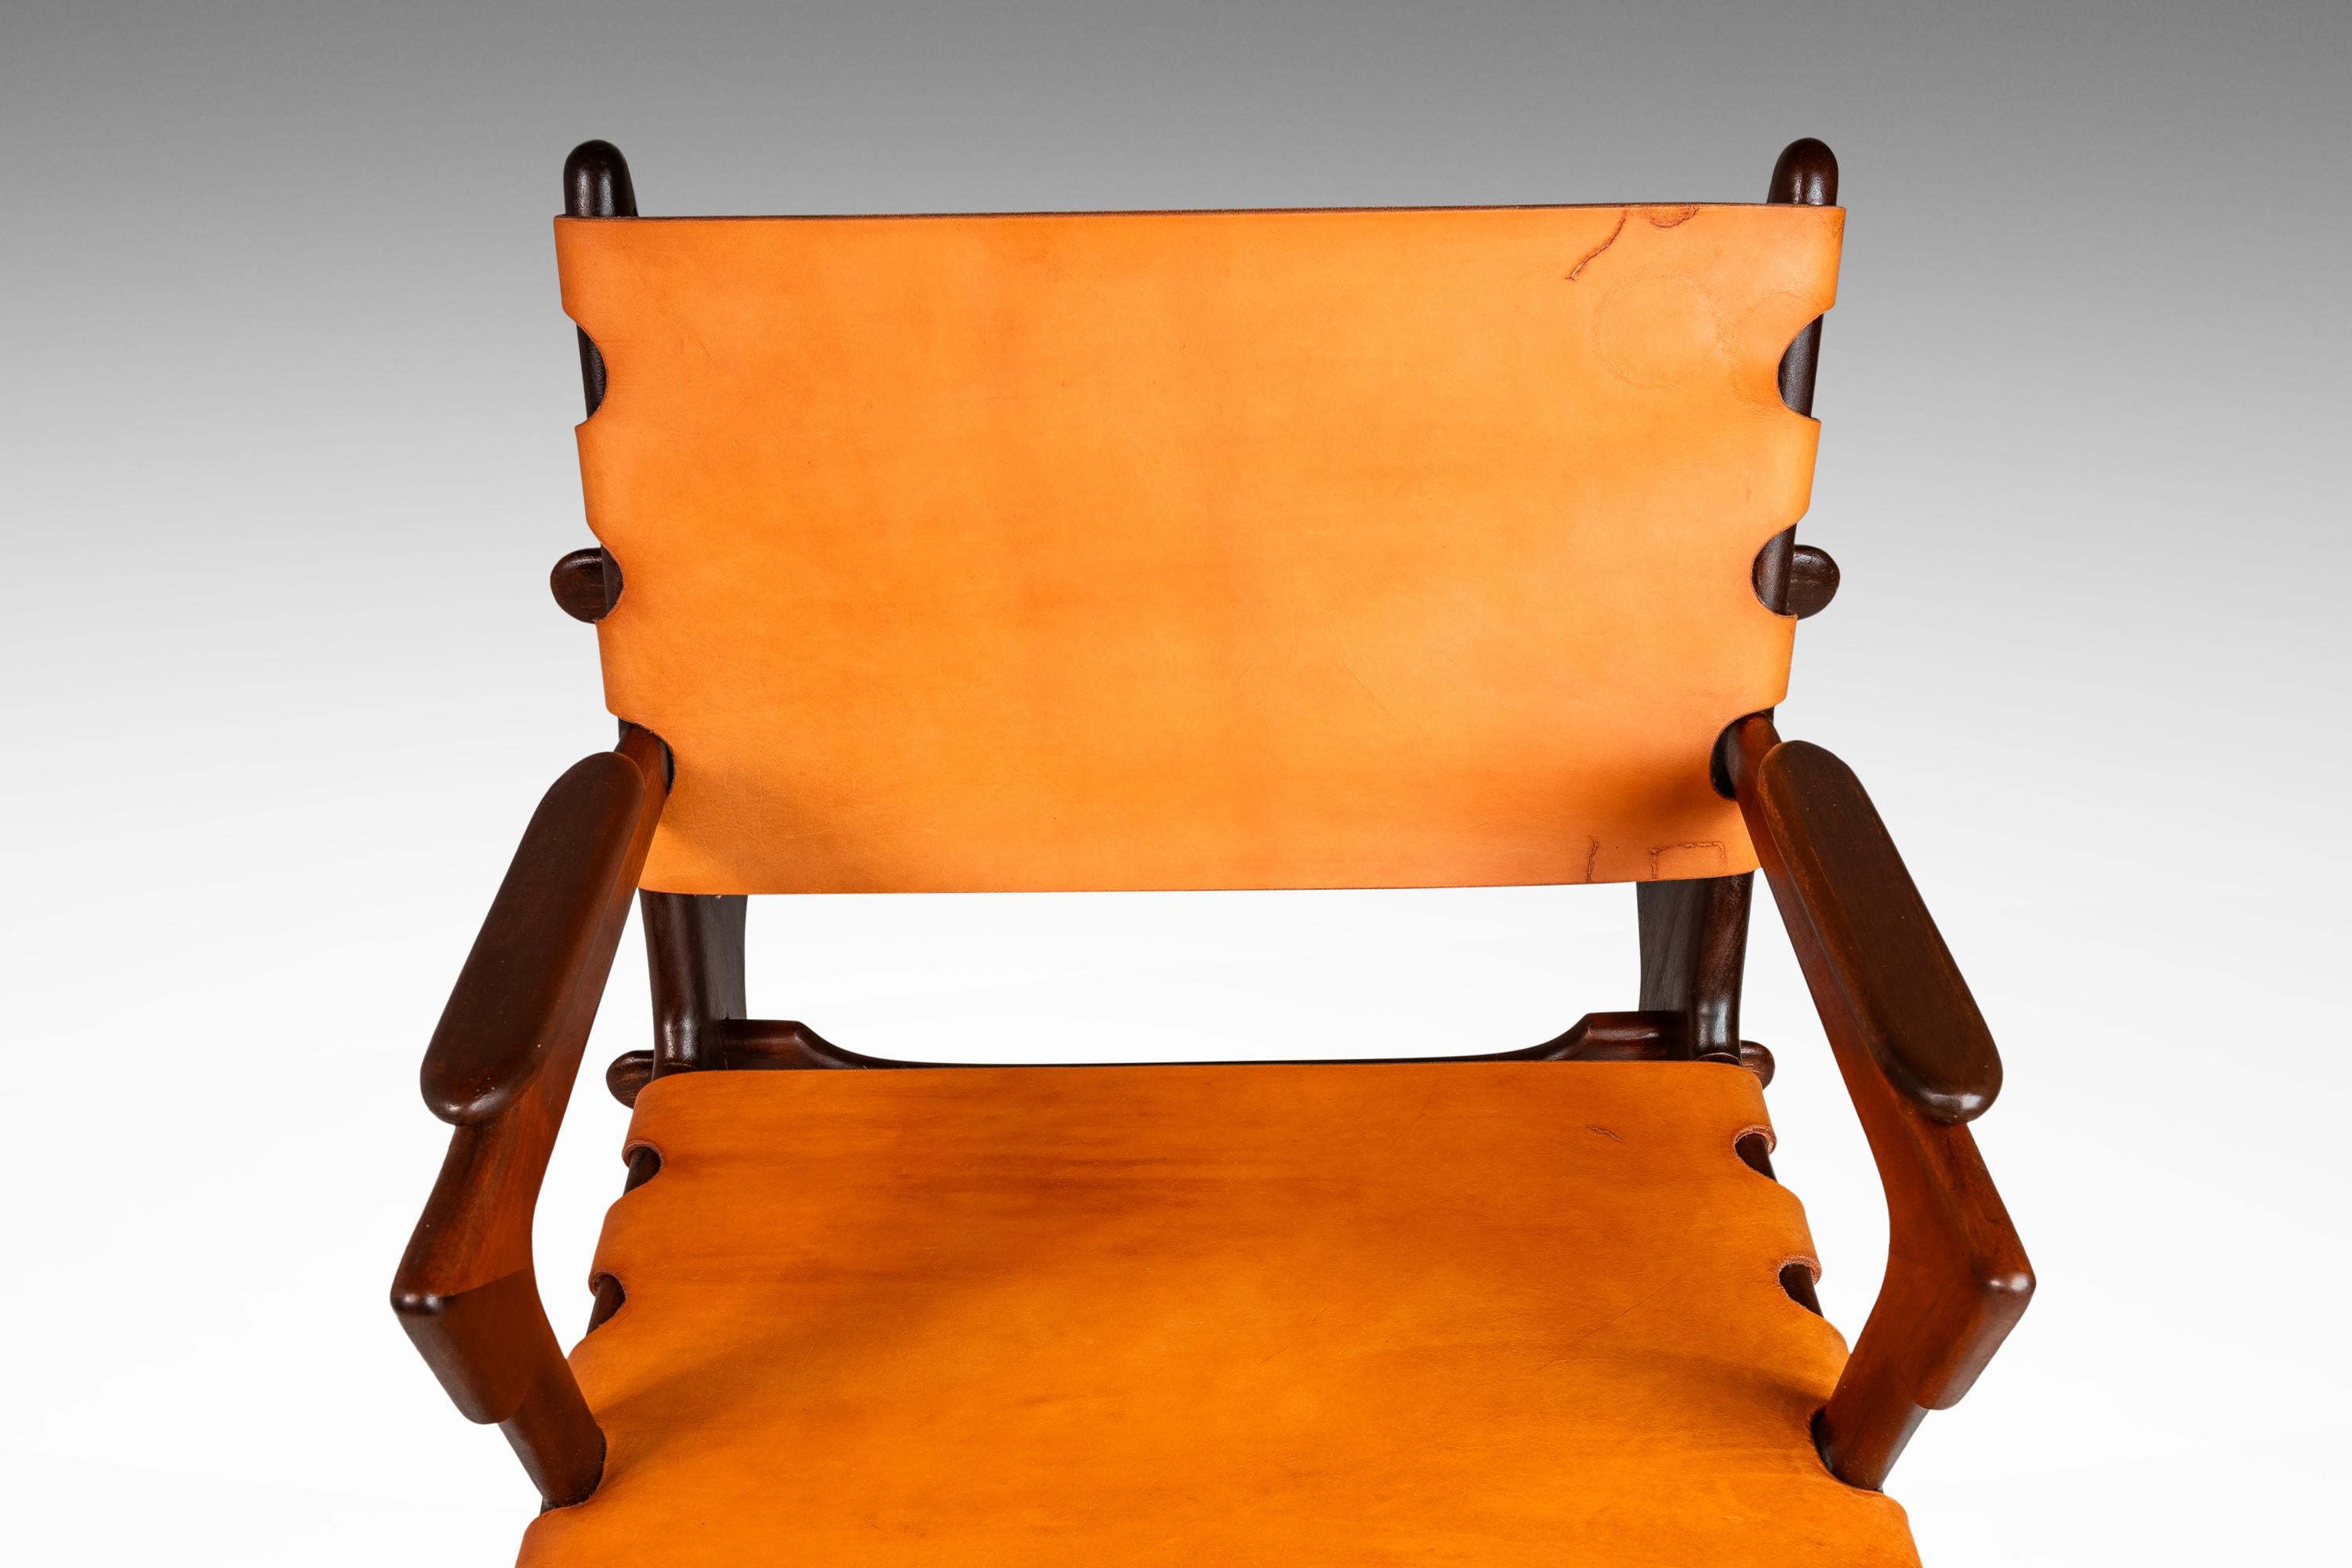 Tooled Leather Sling Safari / Lounge Chair by Angel Pazmino, Ecuador, c. 1960s  For Sale 14